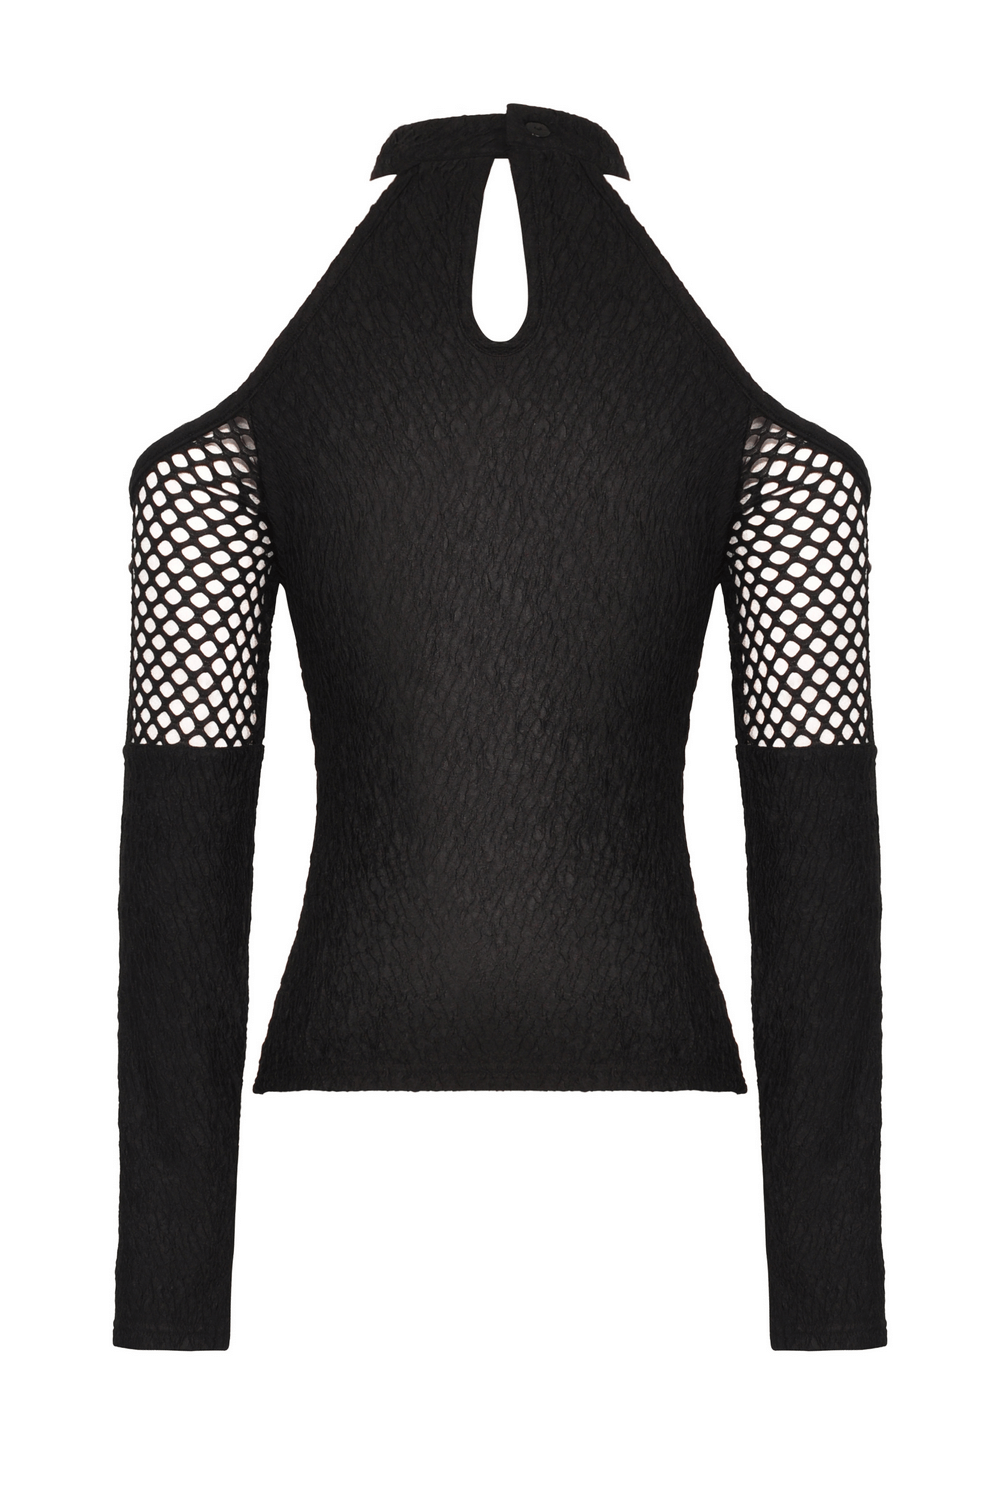 Stylish Lace Top with Cutouts and Lace-Up Sleeves